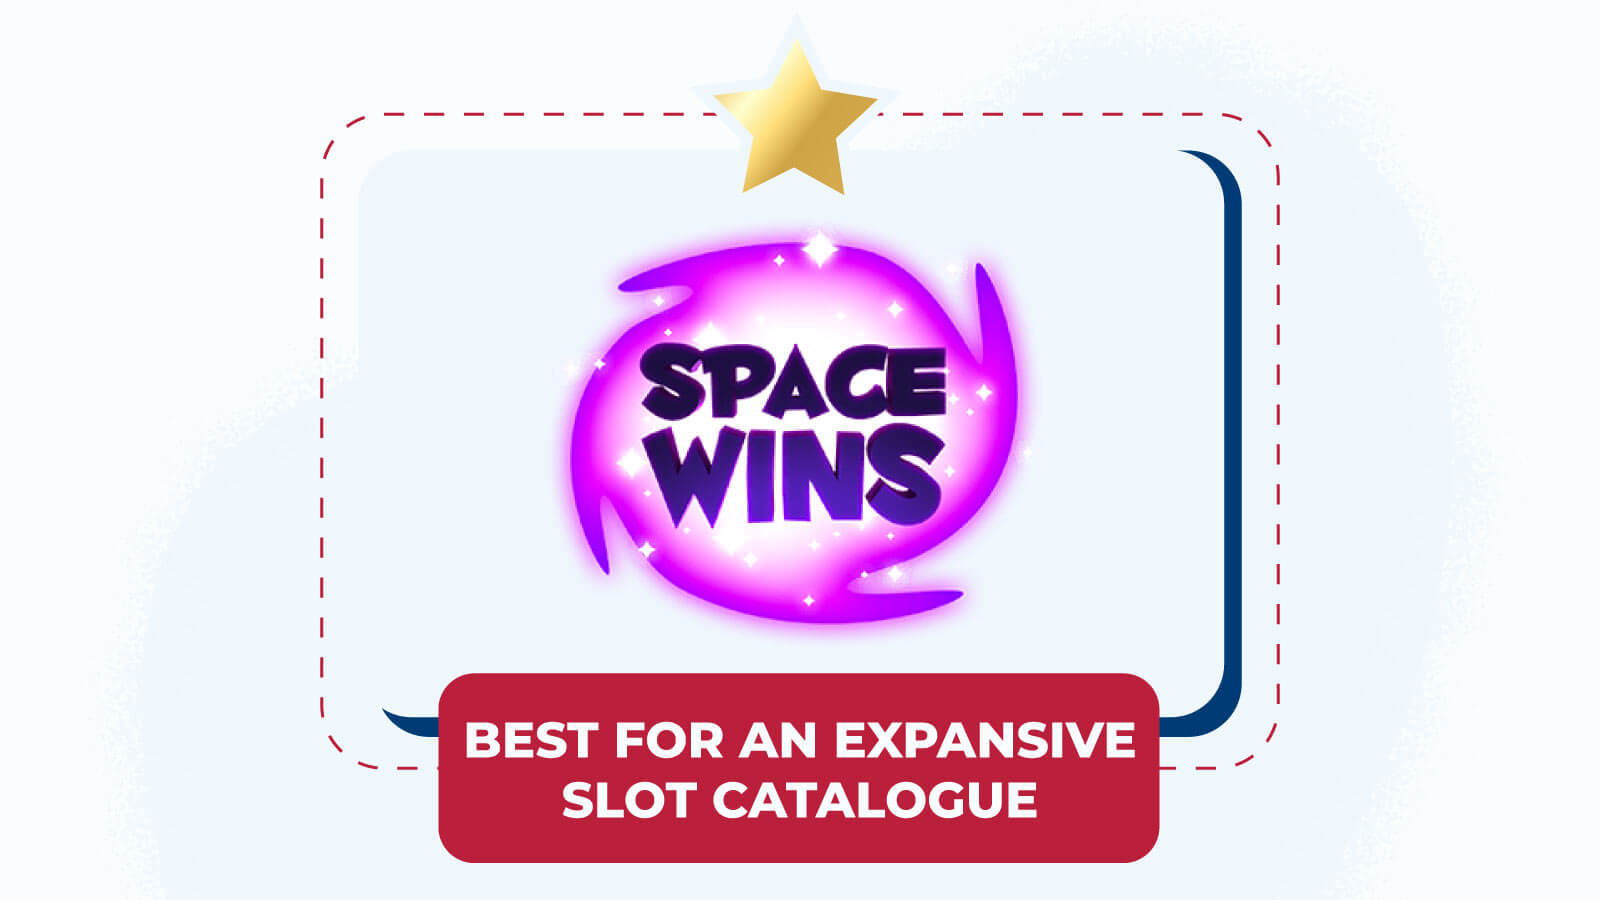 Space Wins Casino – Best for an expansive slot catalogue